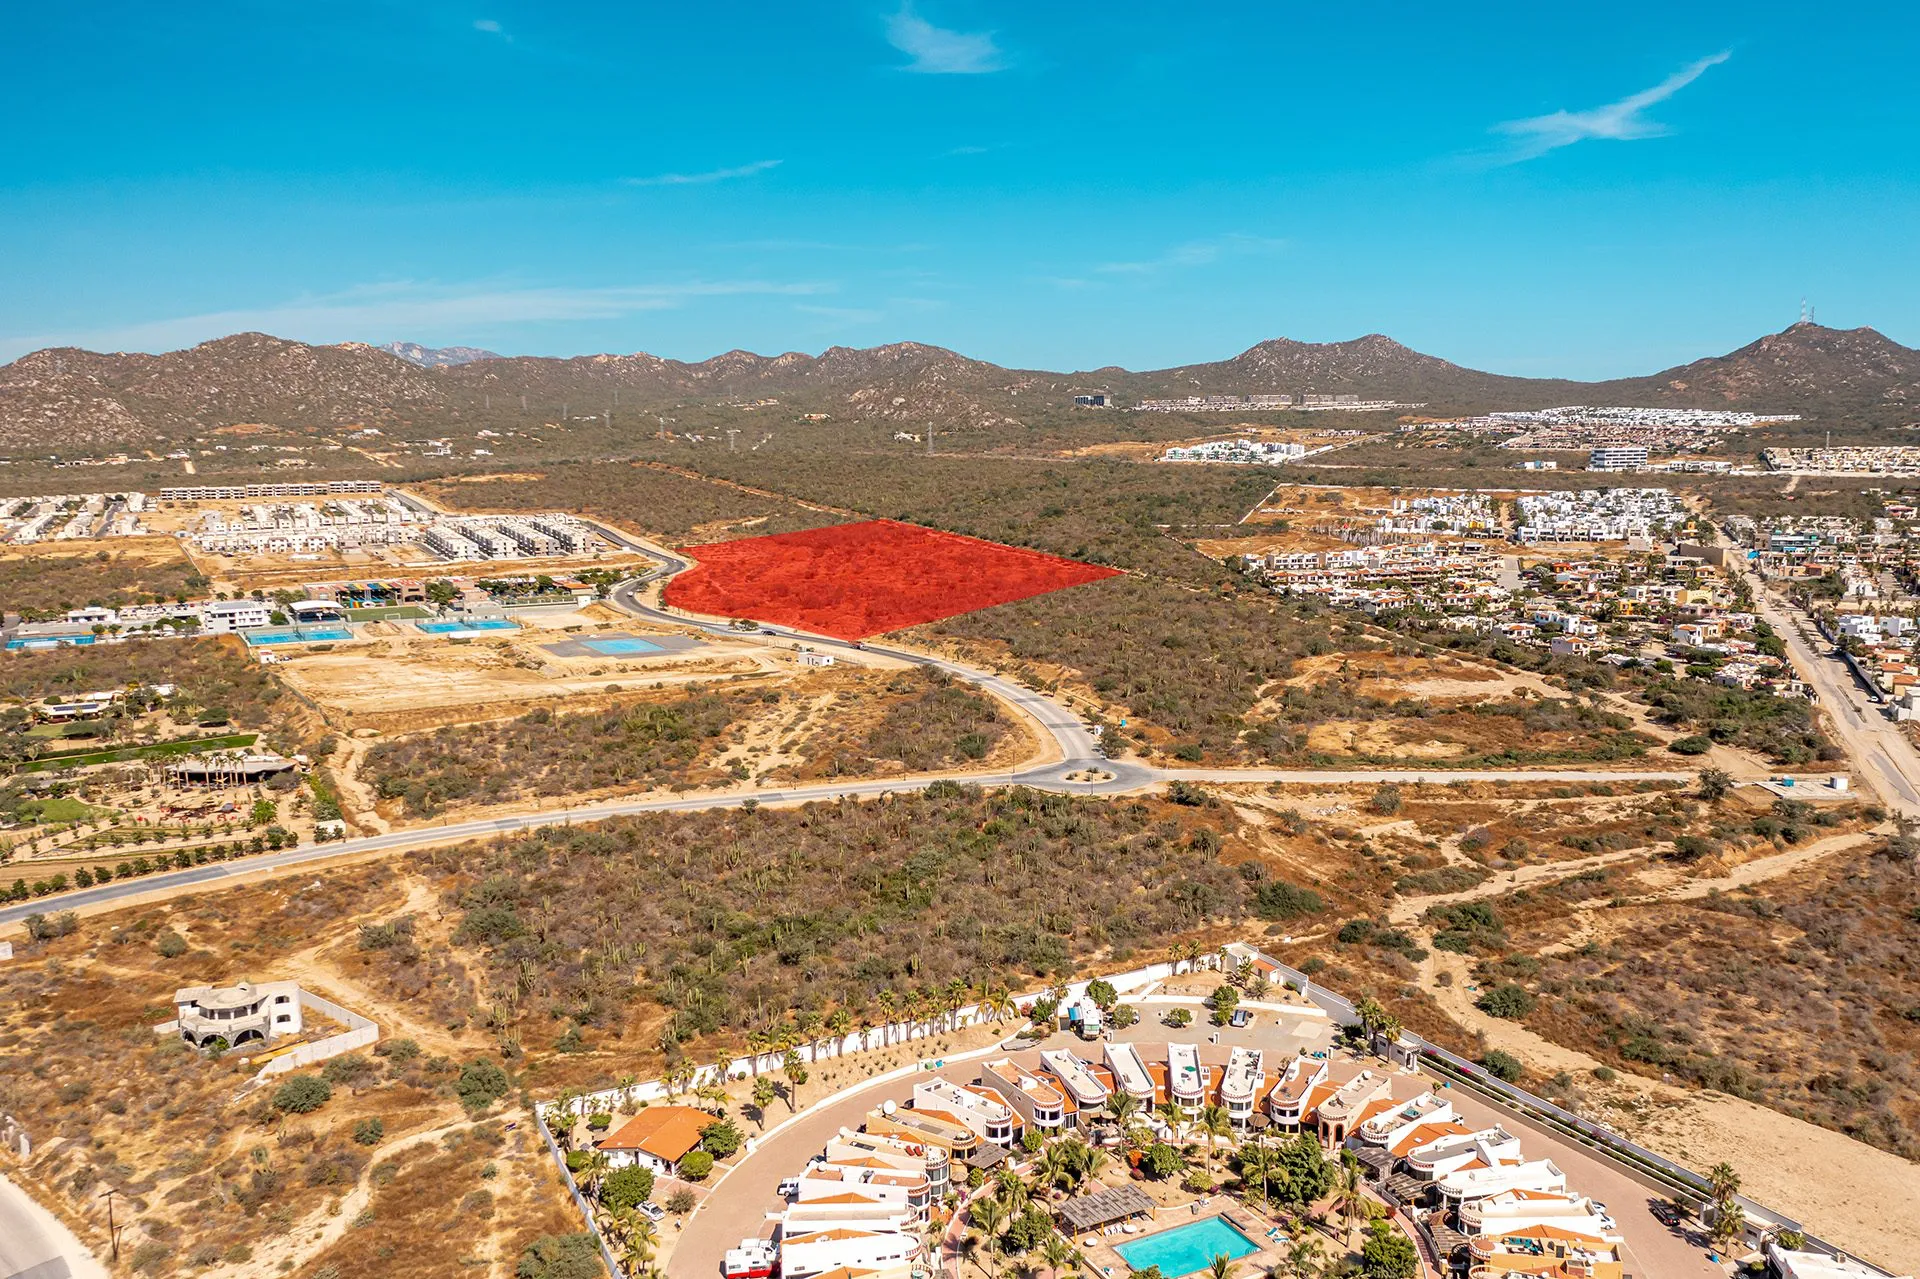 This 15 acre development parcel is located inside one of the most popular communities in Los Cabos.